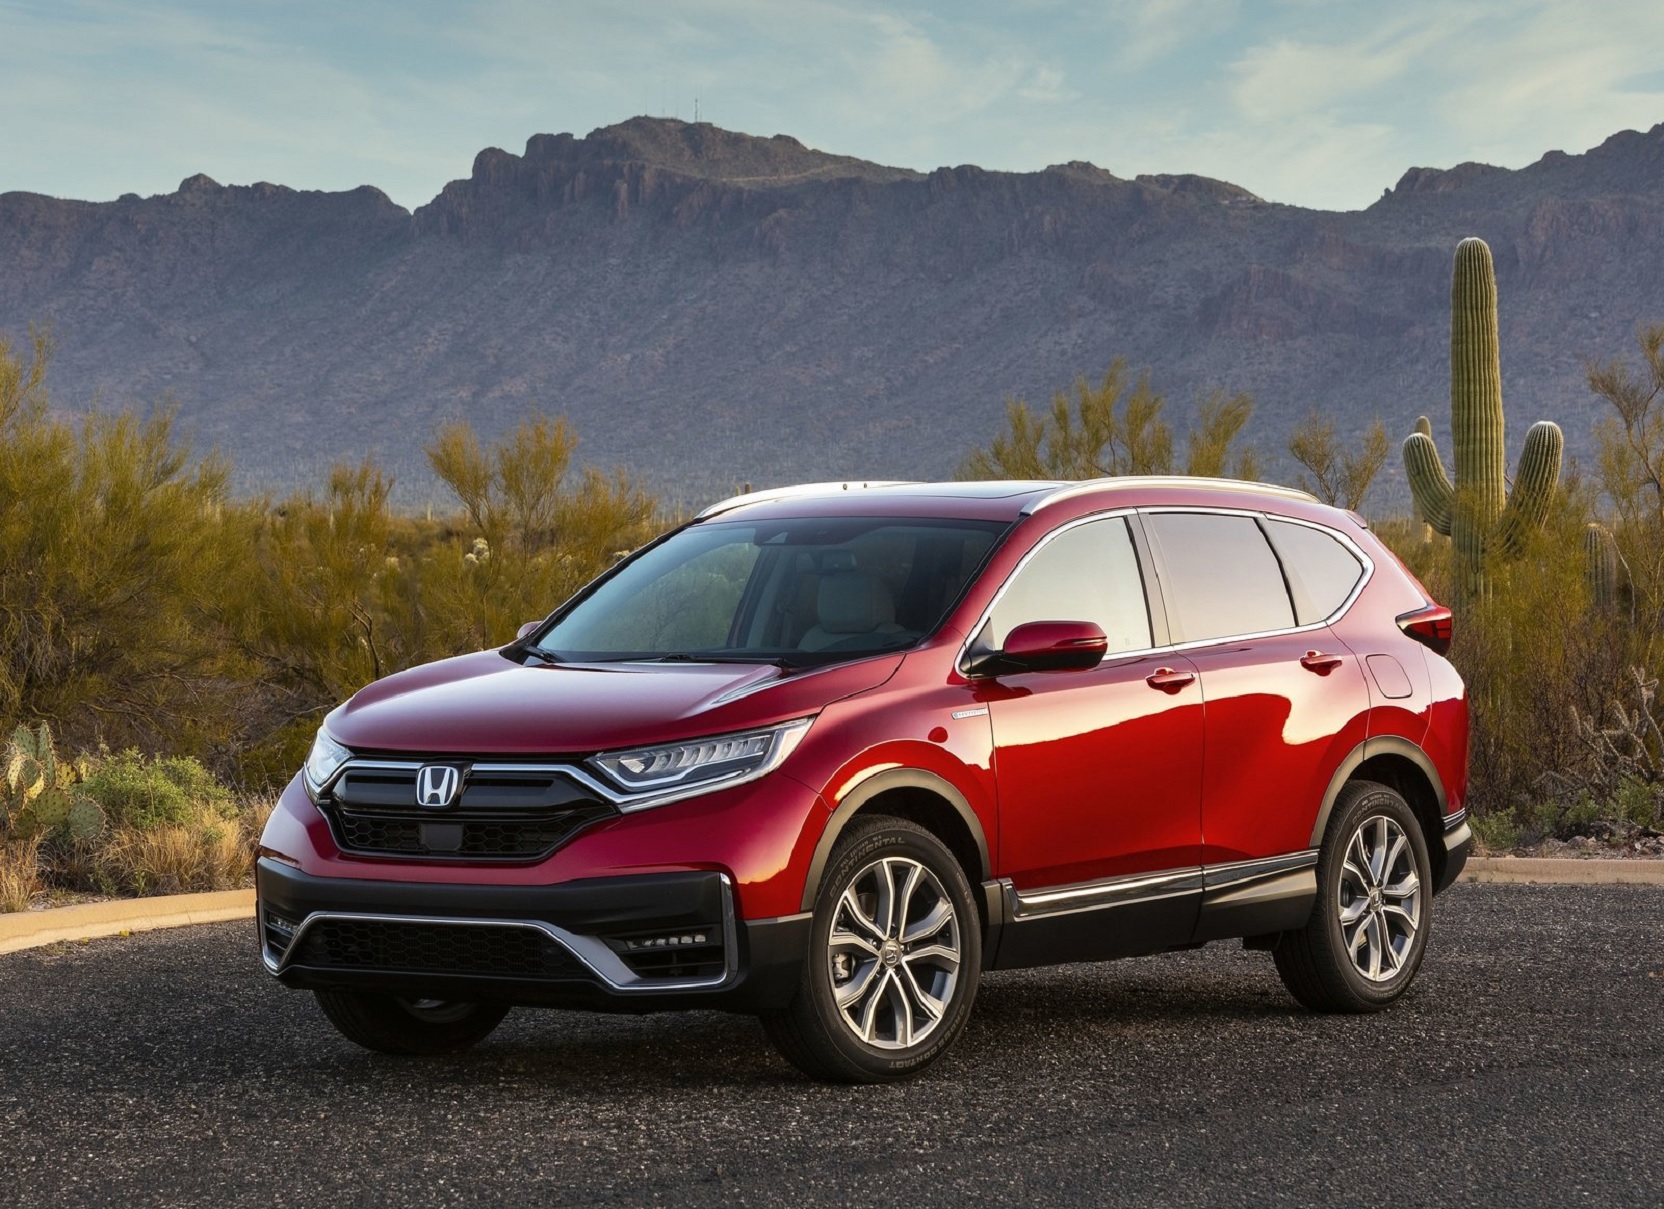 The 2021 Honda CR-V Is the Most Comfortable Compact SUV According to